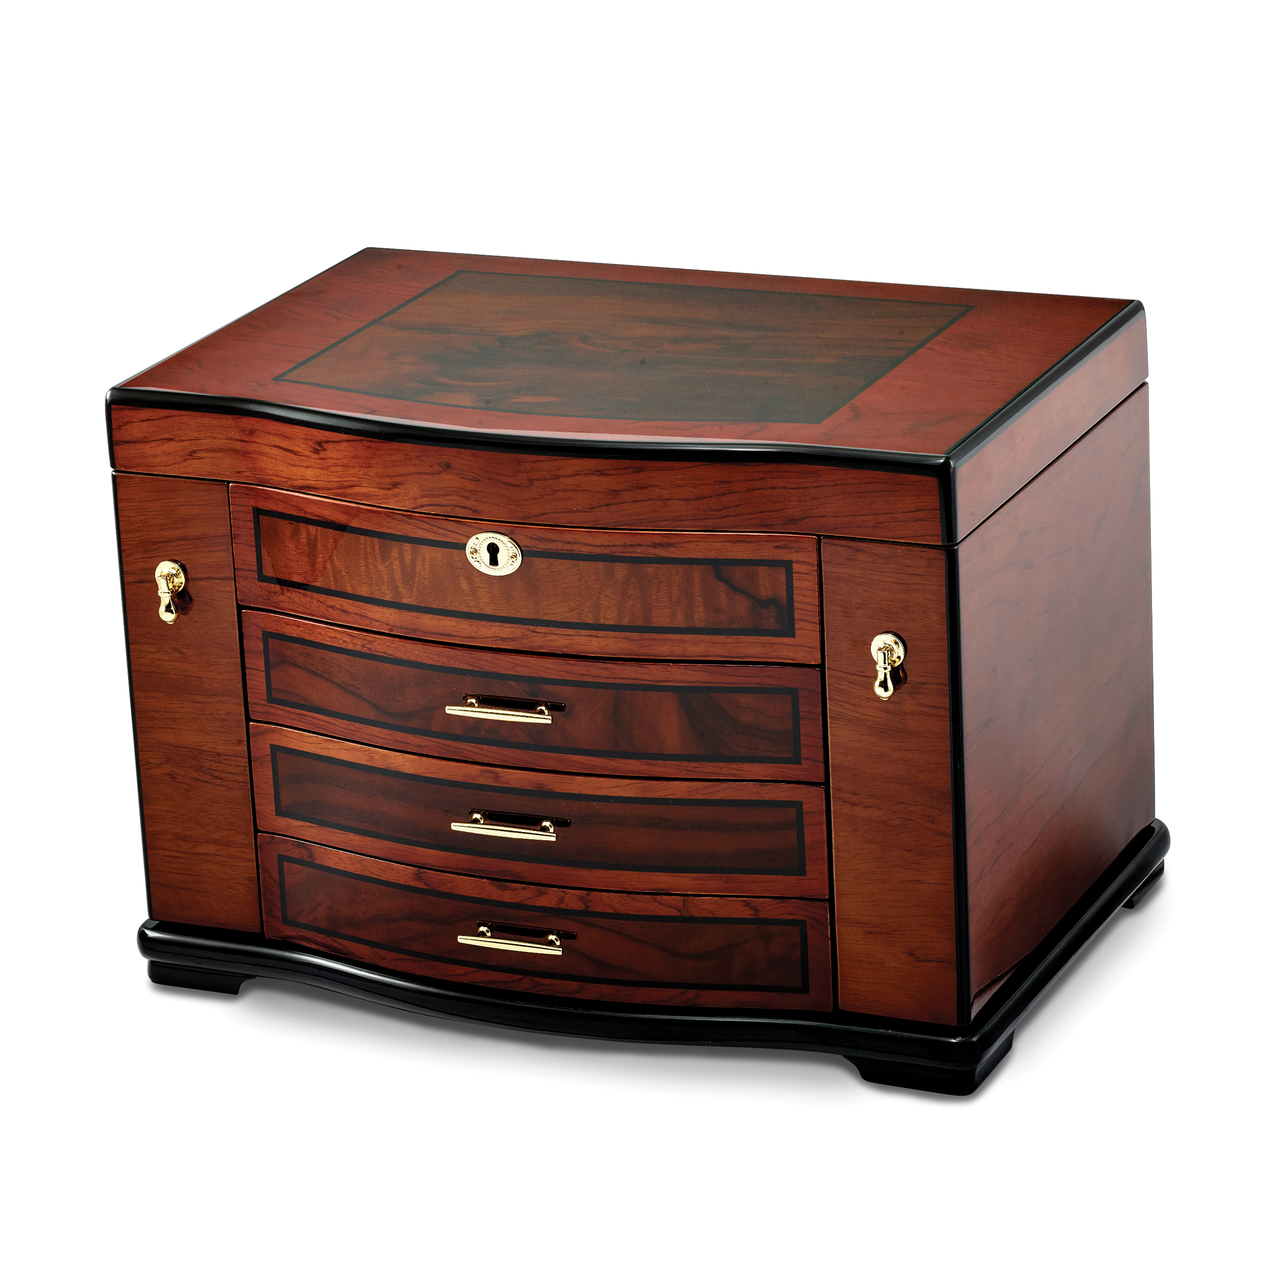 High Gloss Poplar with Burlwood Inlay 3-drawer Jewelry Chest by Jere